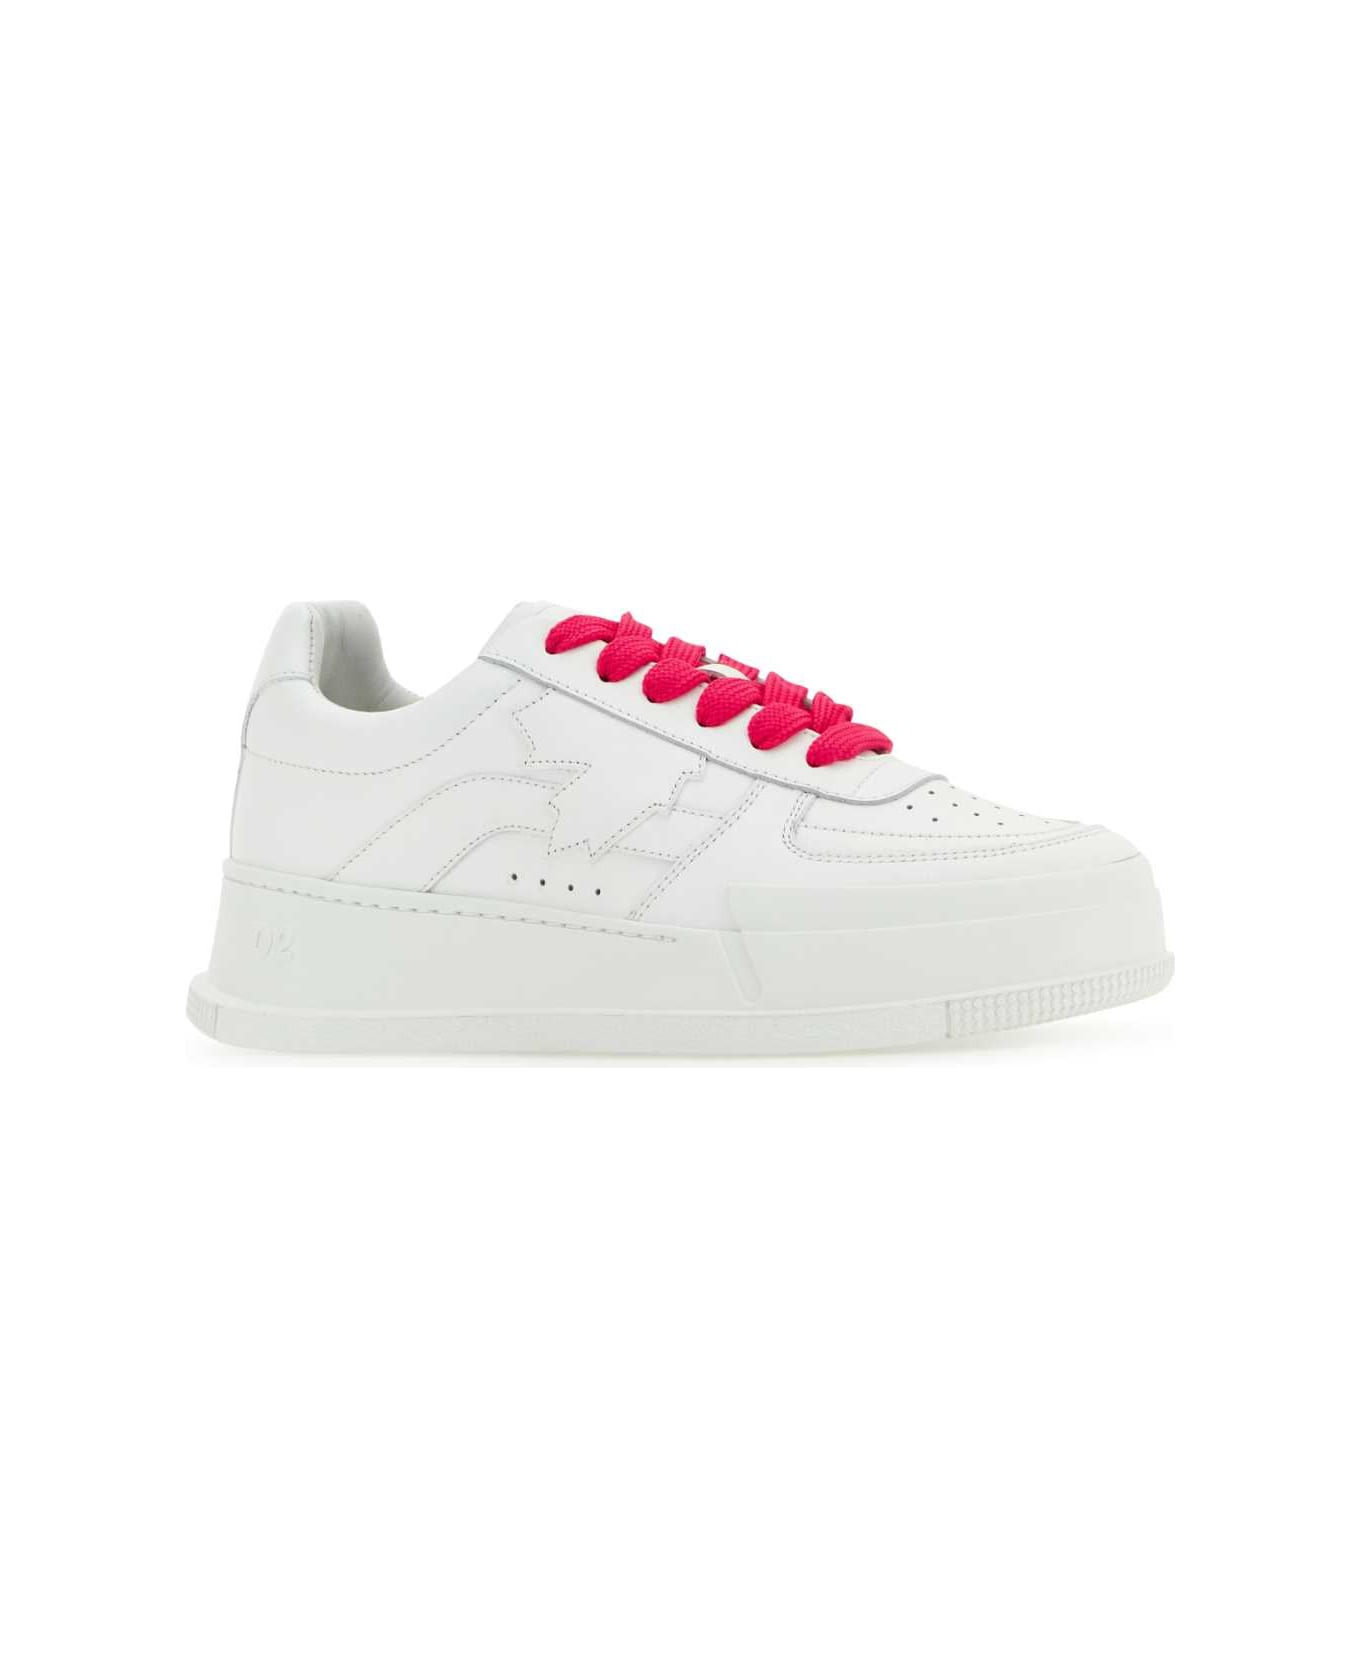 Dsquared2 Canadian Sneakers - WHITEFUXIA